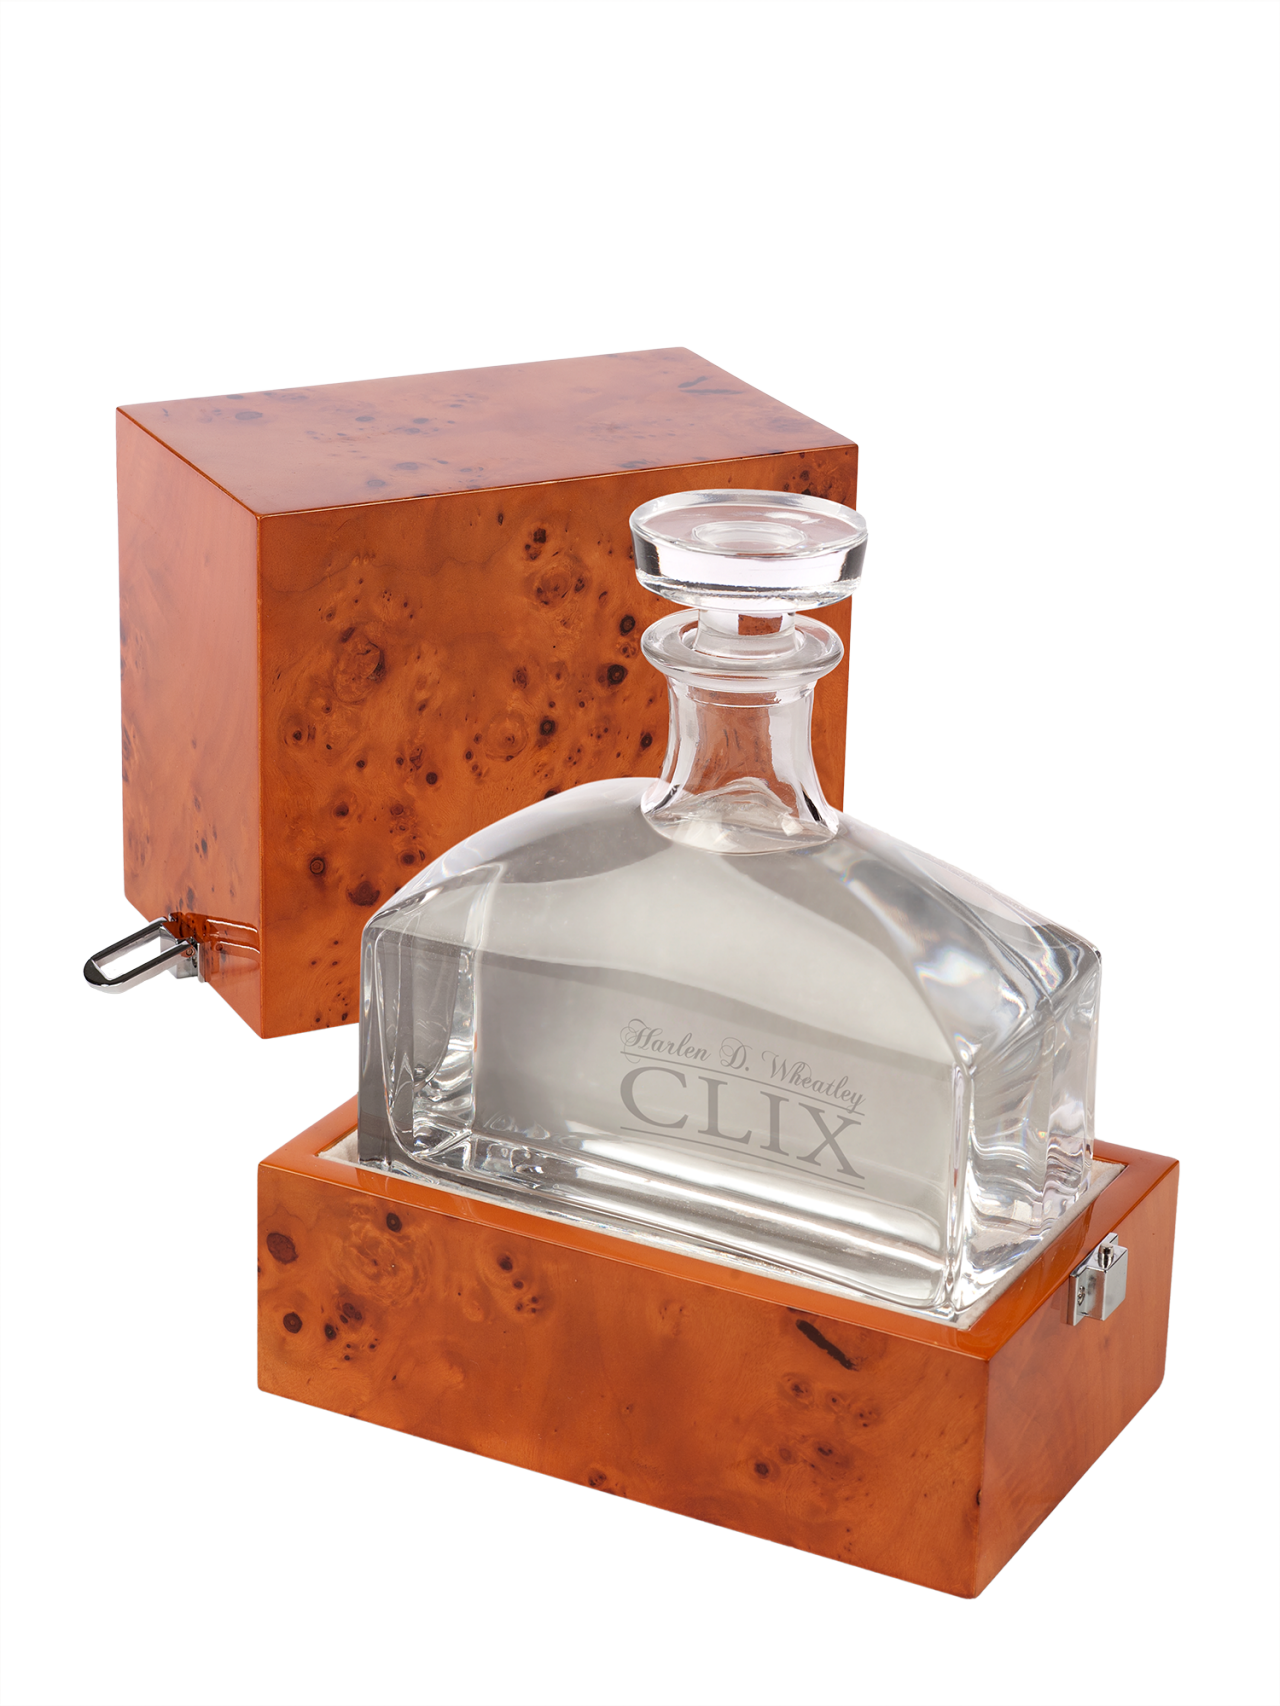 Clix Bottle in Box